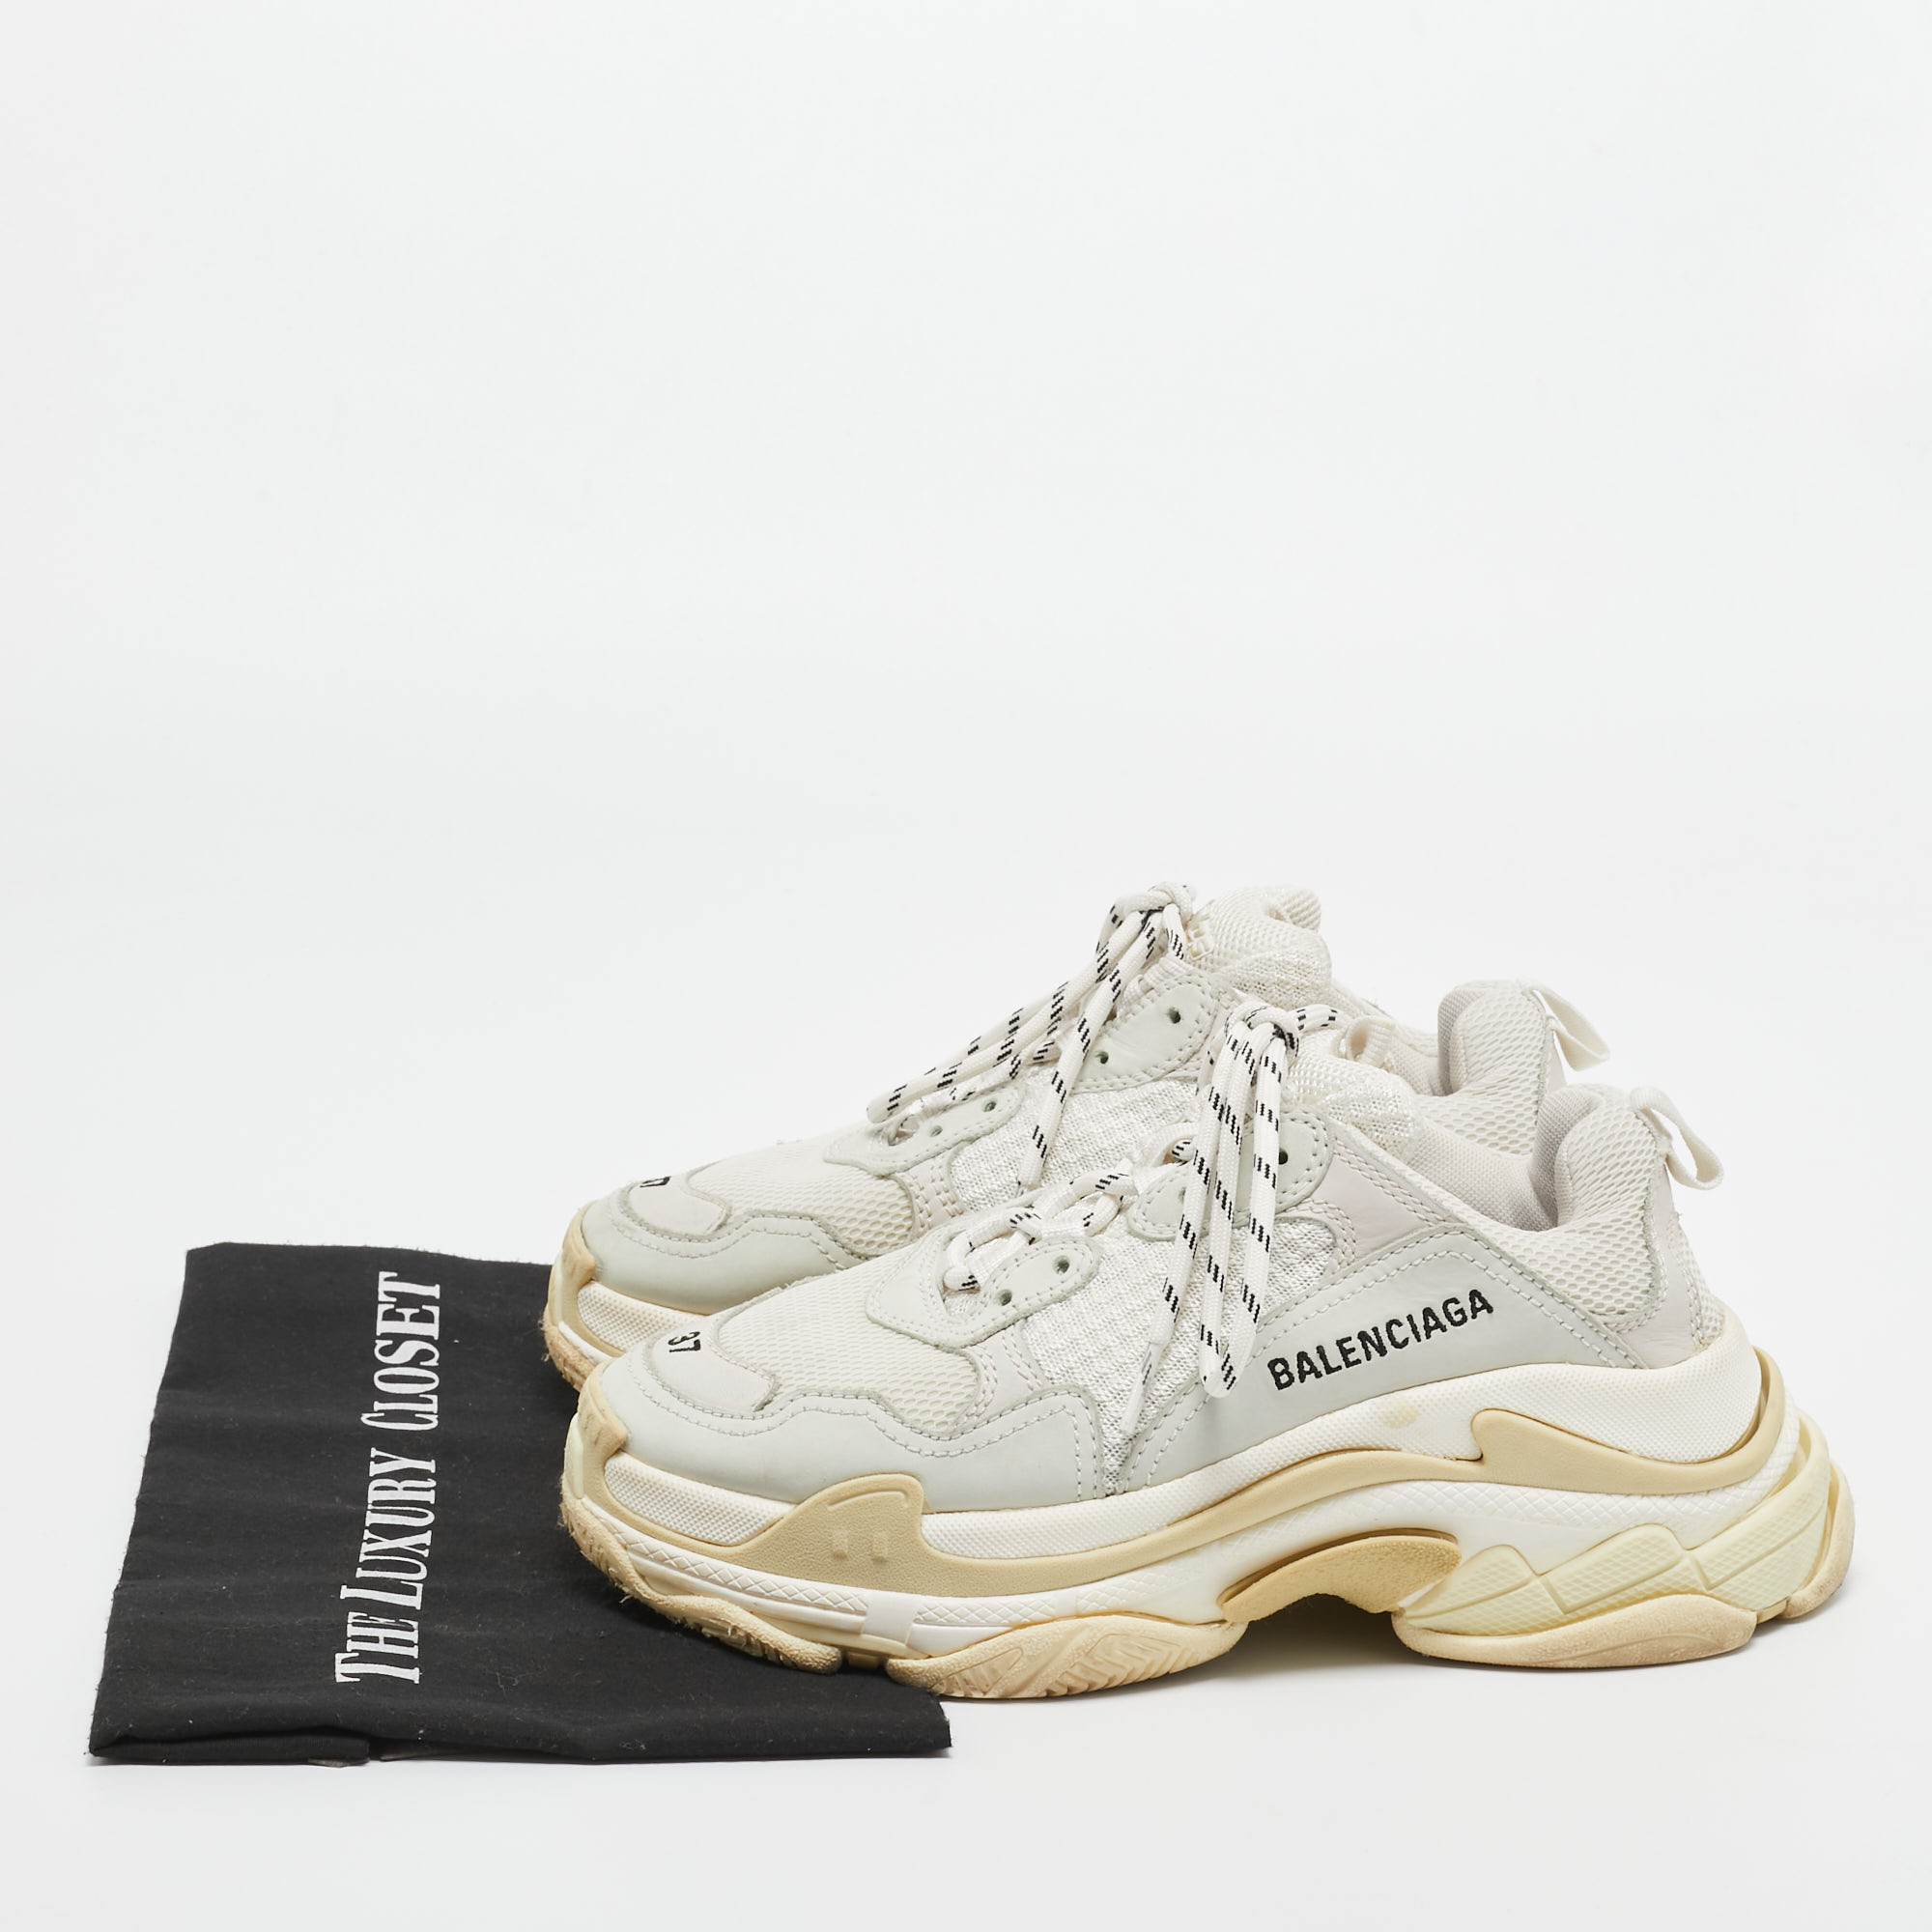 Balenciaga White/Grey Mesh And Leather Triple S Sneakers Size 37